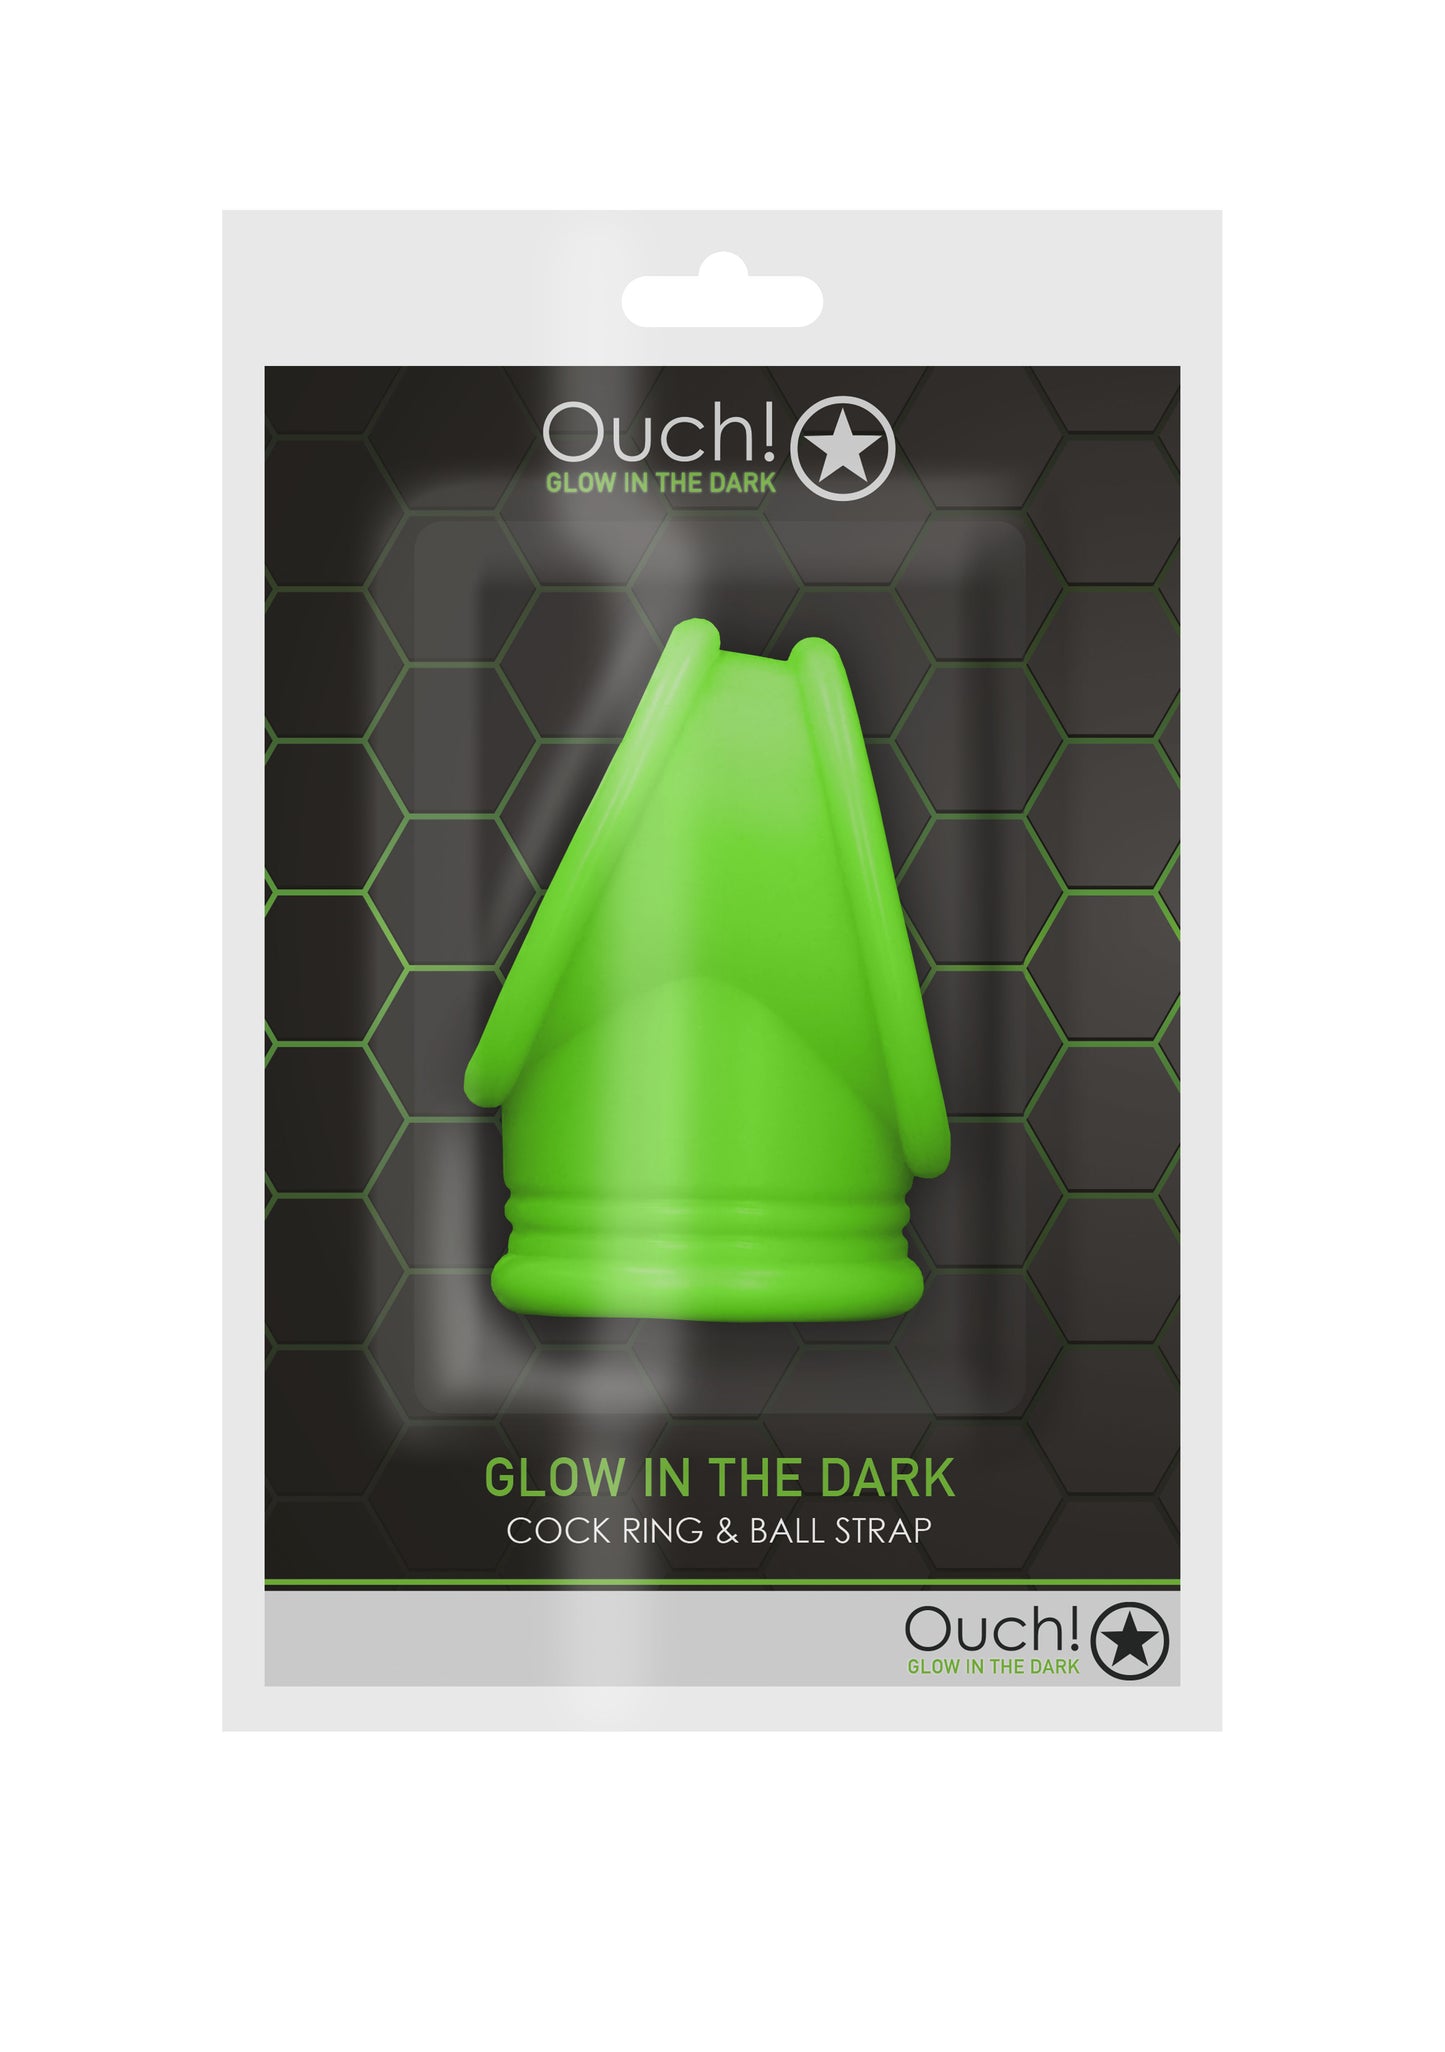 Ouch! Cockring & Ball Strap - Glow in the Dark